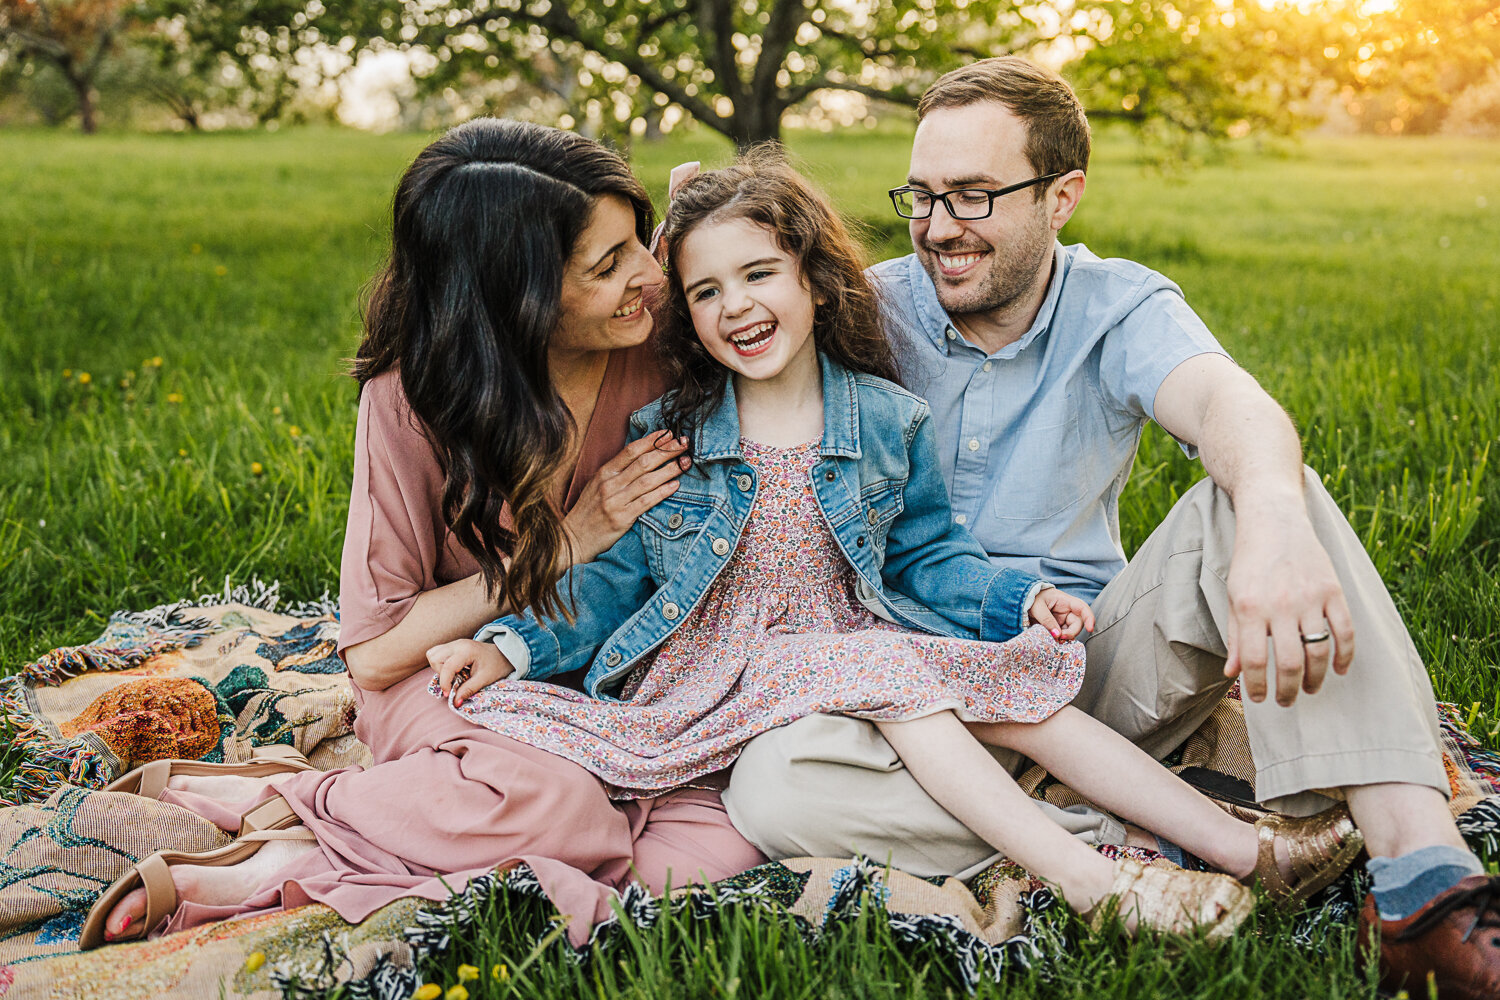 mom and dad laugh with daughter in a field of blossoms at sunset